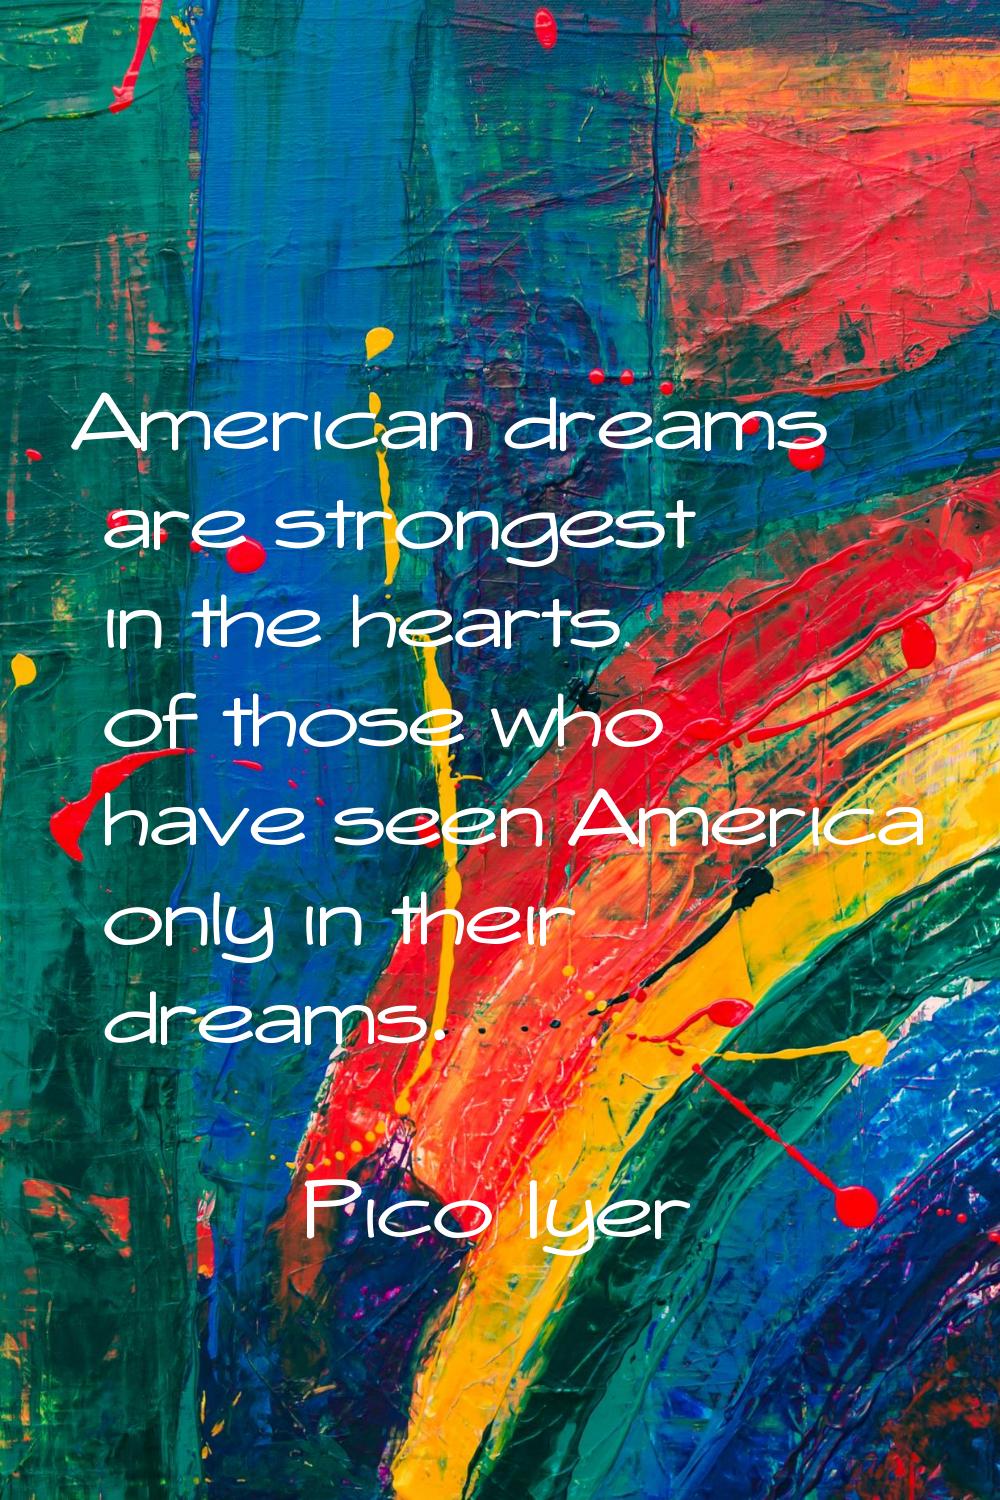 American dreams are strongest in the hearts of those who have seen America only in their dreams.